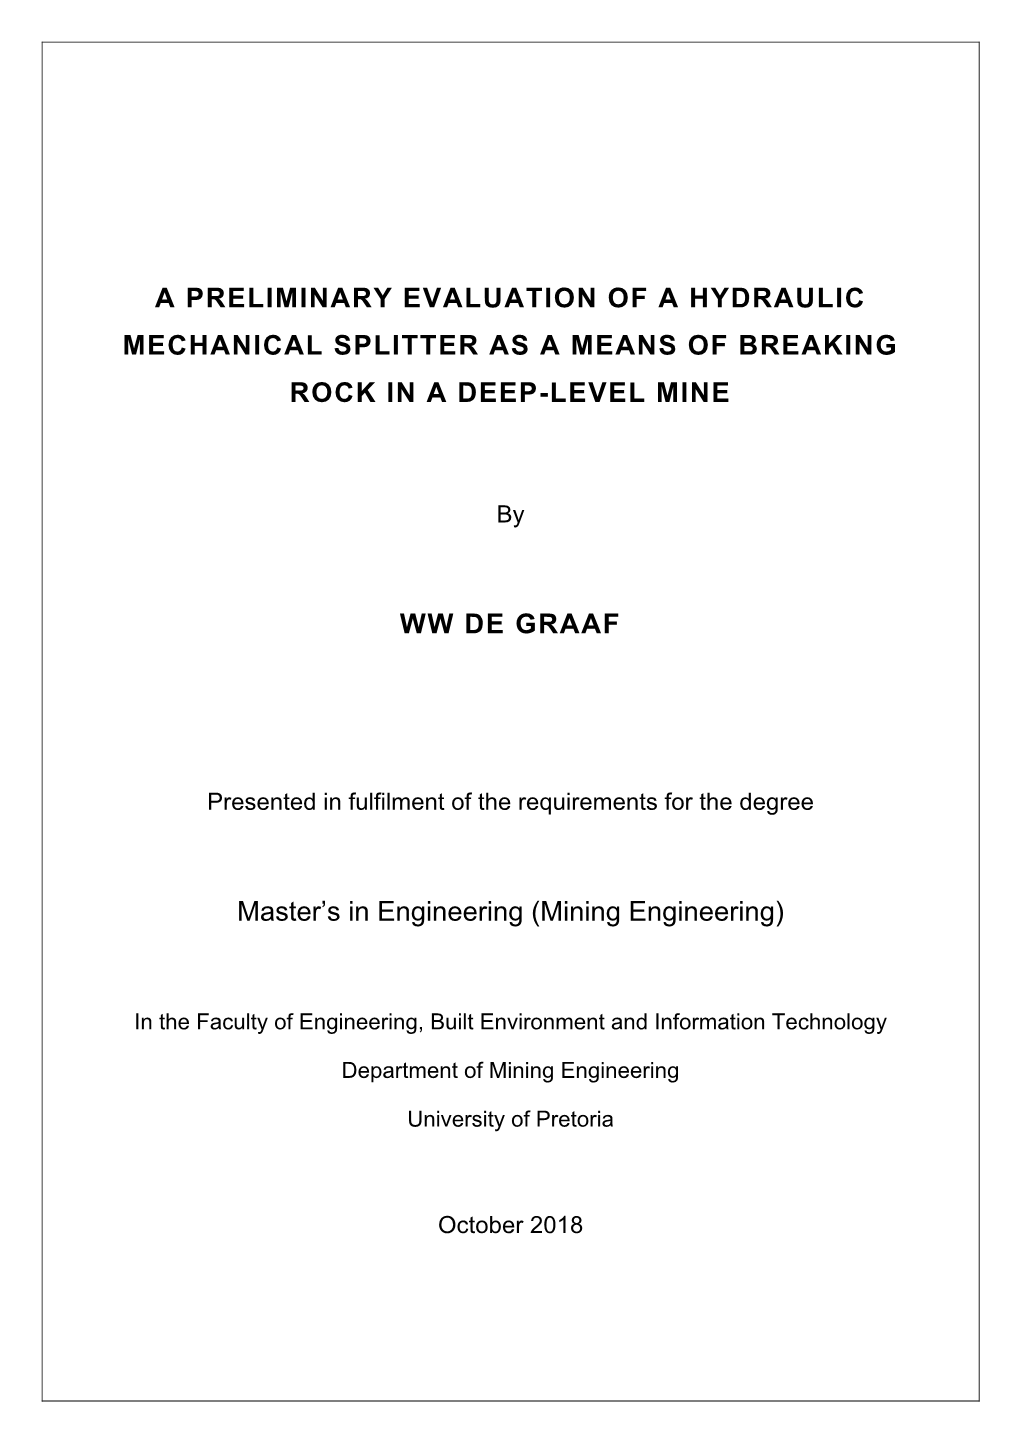 A PRELIMINARY EVALUATION of a HYDRAULIC MECHANICAL SPLITTER AS a MEANS of BREAKING ROCK in a DEEP-LEVEL MINE WW DE GRAAF Master